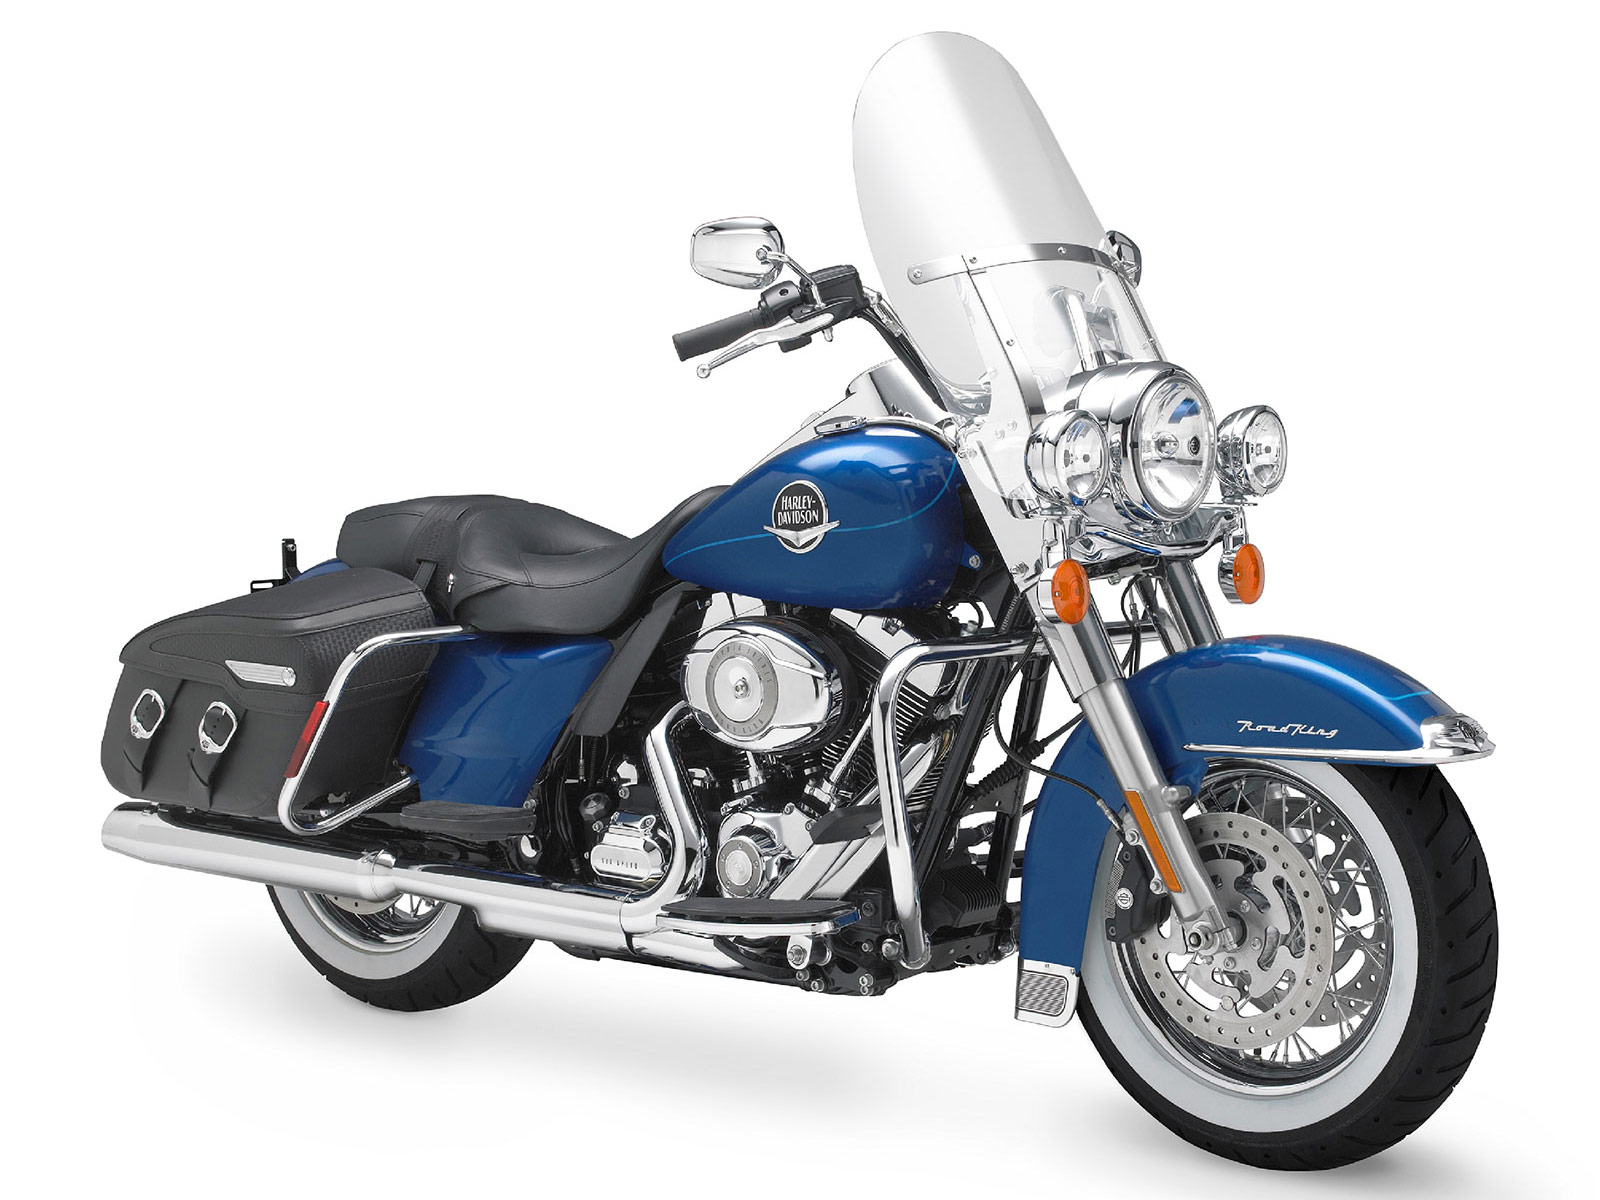 2010 Harley Davidson Road King Classic FLHRC Touring Motorcycle